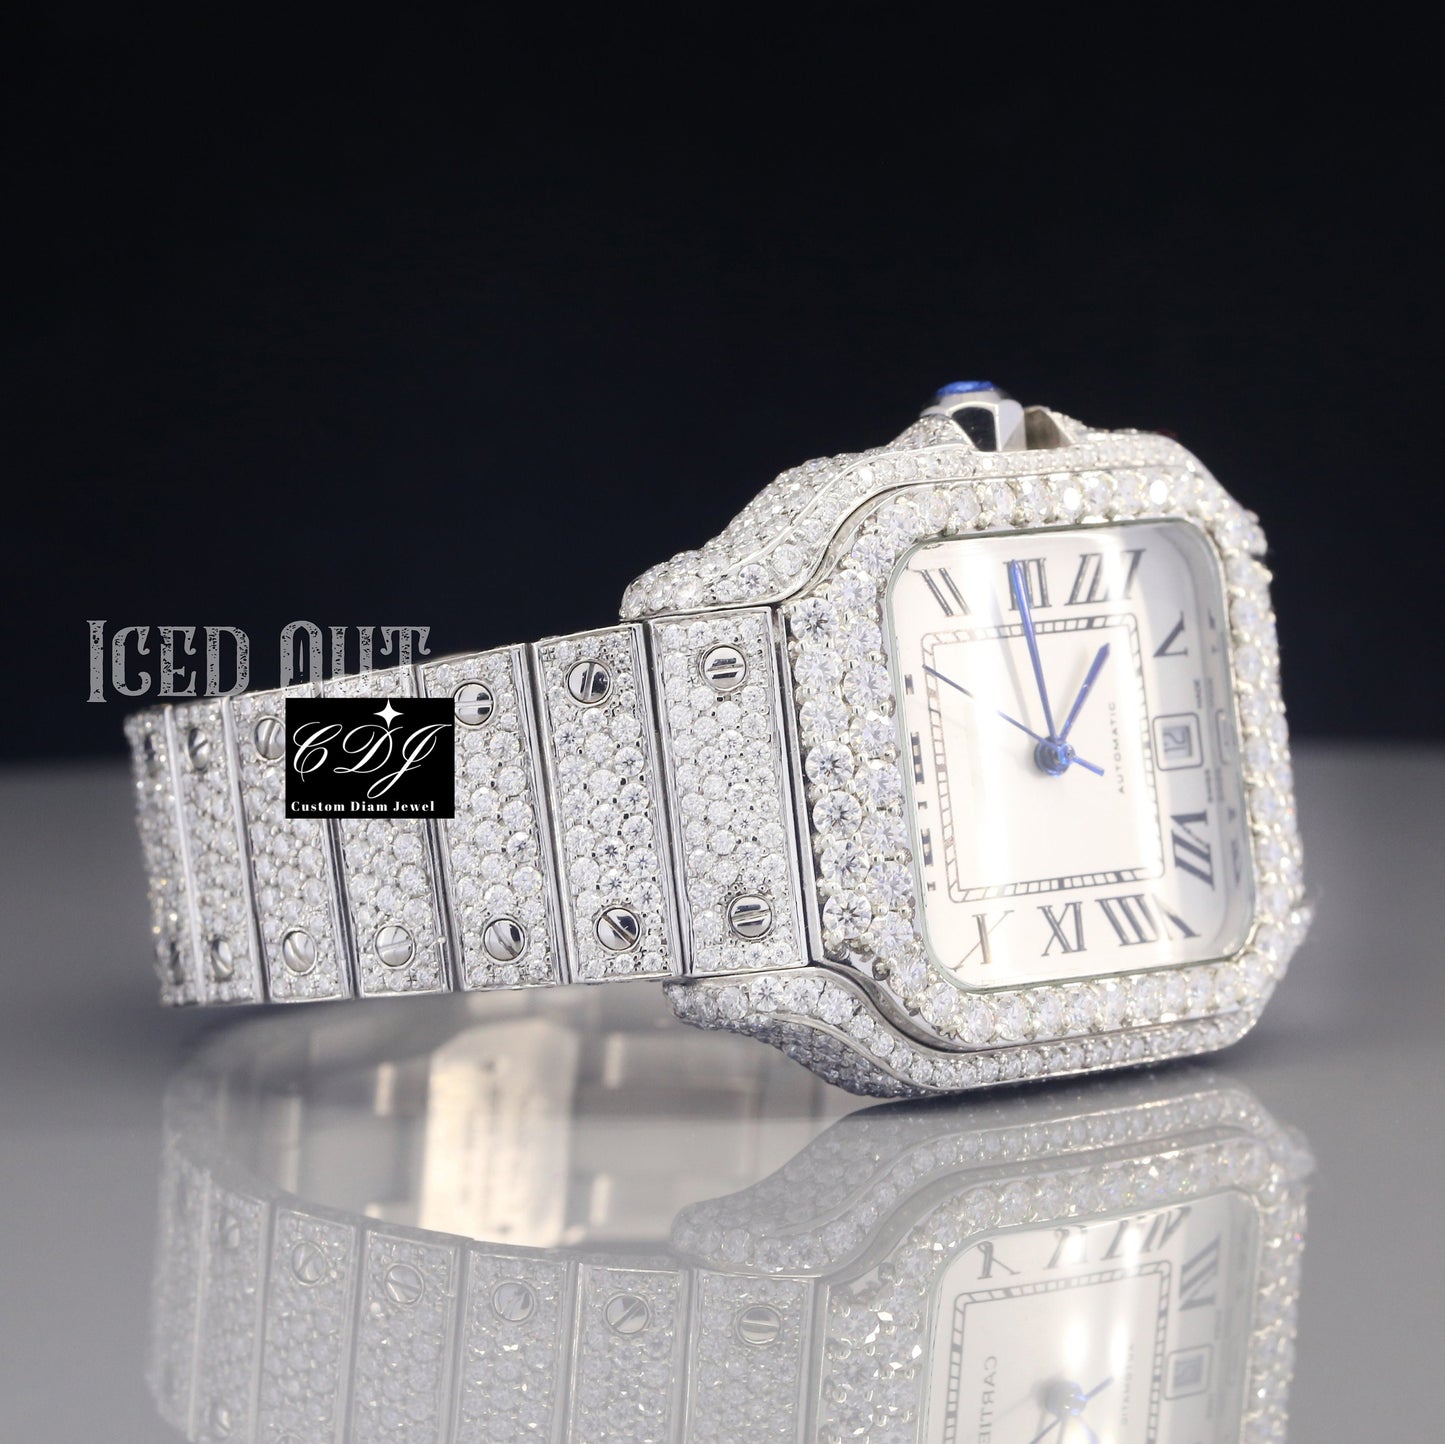 Premium VVS Iced Out Moissanite Diamond Watch for Men Gold Plated Hip-hop Jewelry Watch(20 to 23CTW Approx.)